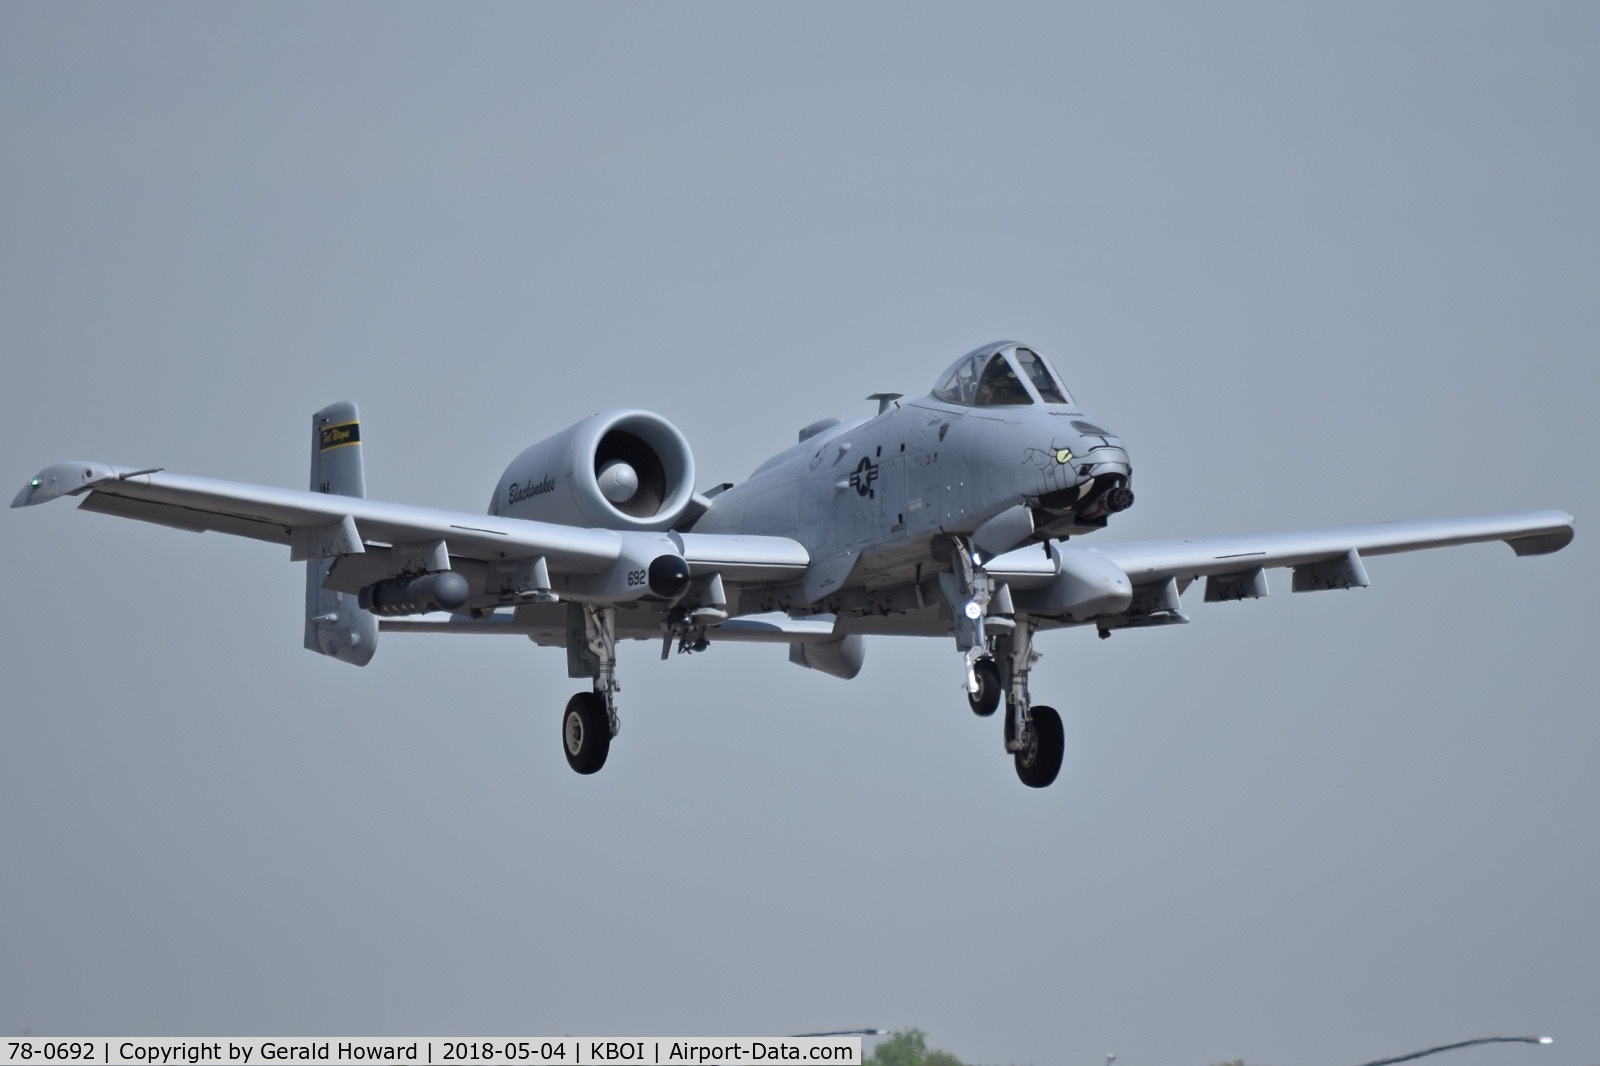 78-0692, 1978 Fairchild Republic A-10C Thunderbolt II C/N A10-0312, On final for RWY 10R. 163rd Fighter Sq. “Blacksnakes”, 122nd Fighter Wing , Fort Wayne, IN ANG.